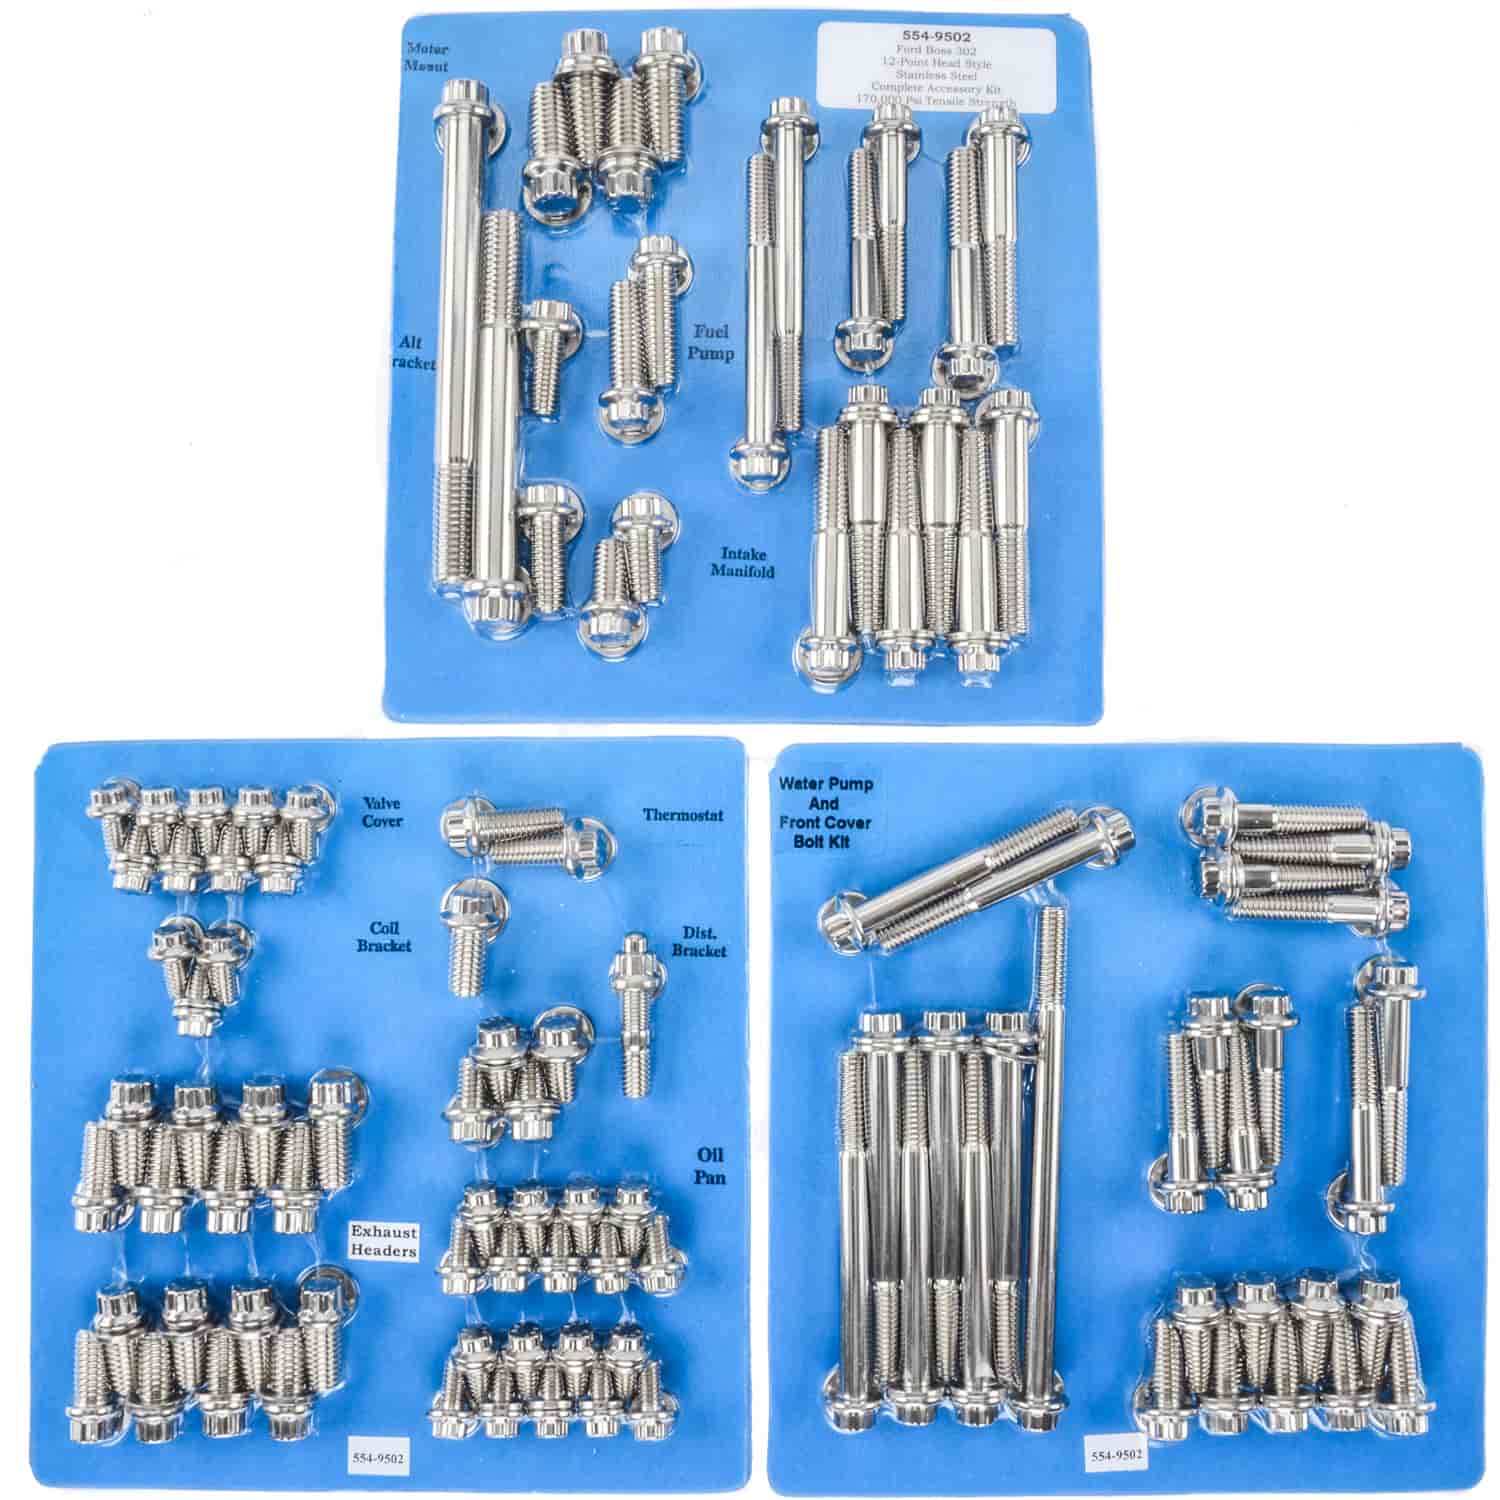 Stainless Steel 12-Point Head Fastener Kit Ford Boss 302, small block